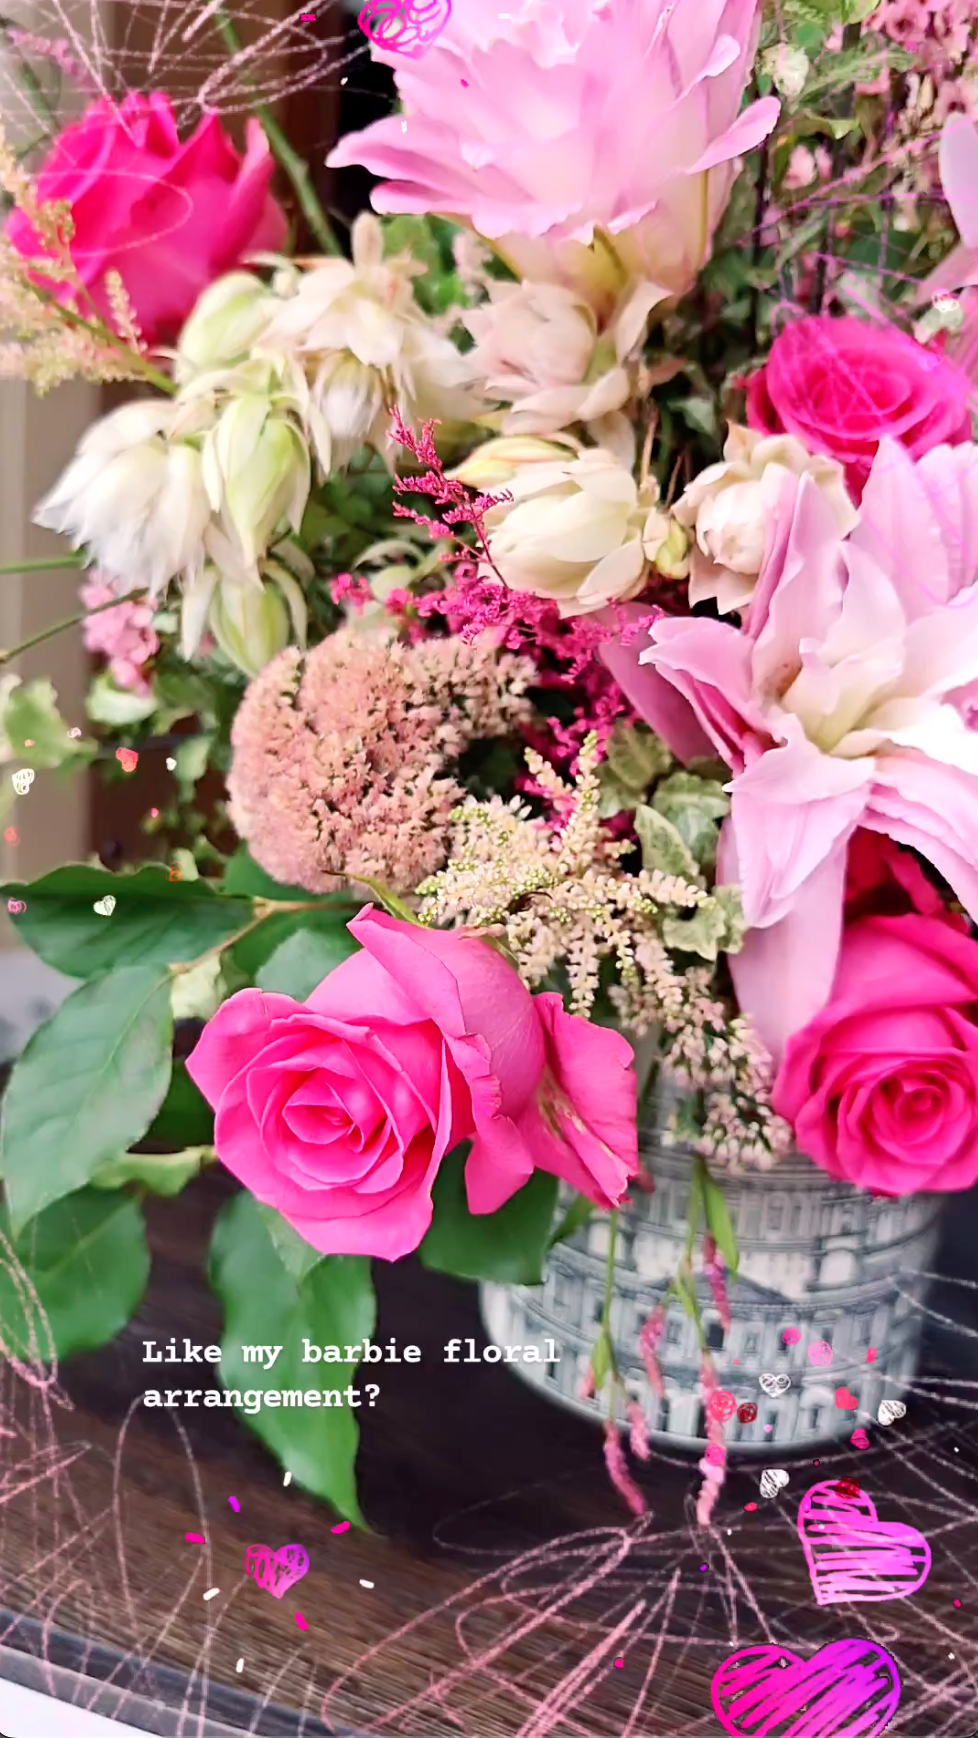 Pink floral arrangement showcasing a balance of vibrant shocking pink and gentle pastels, perfect for a 'Pink Fever' event or soirée.